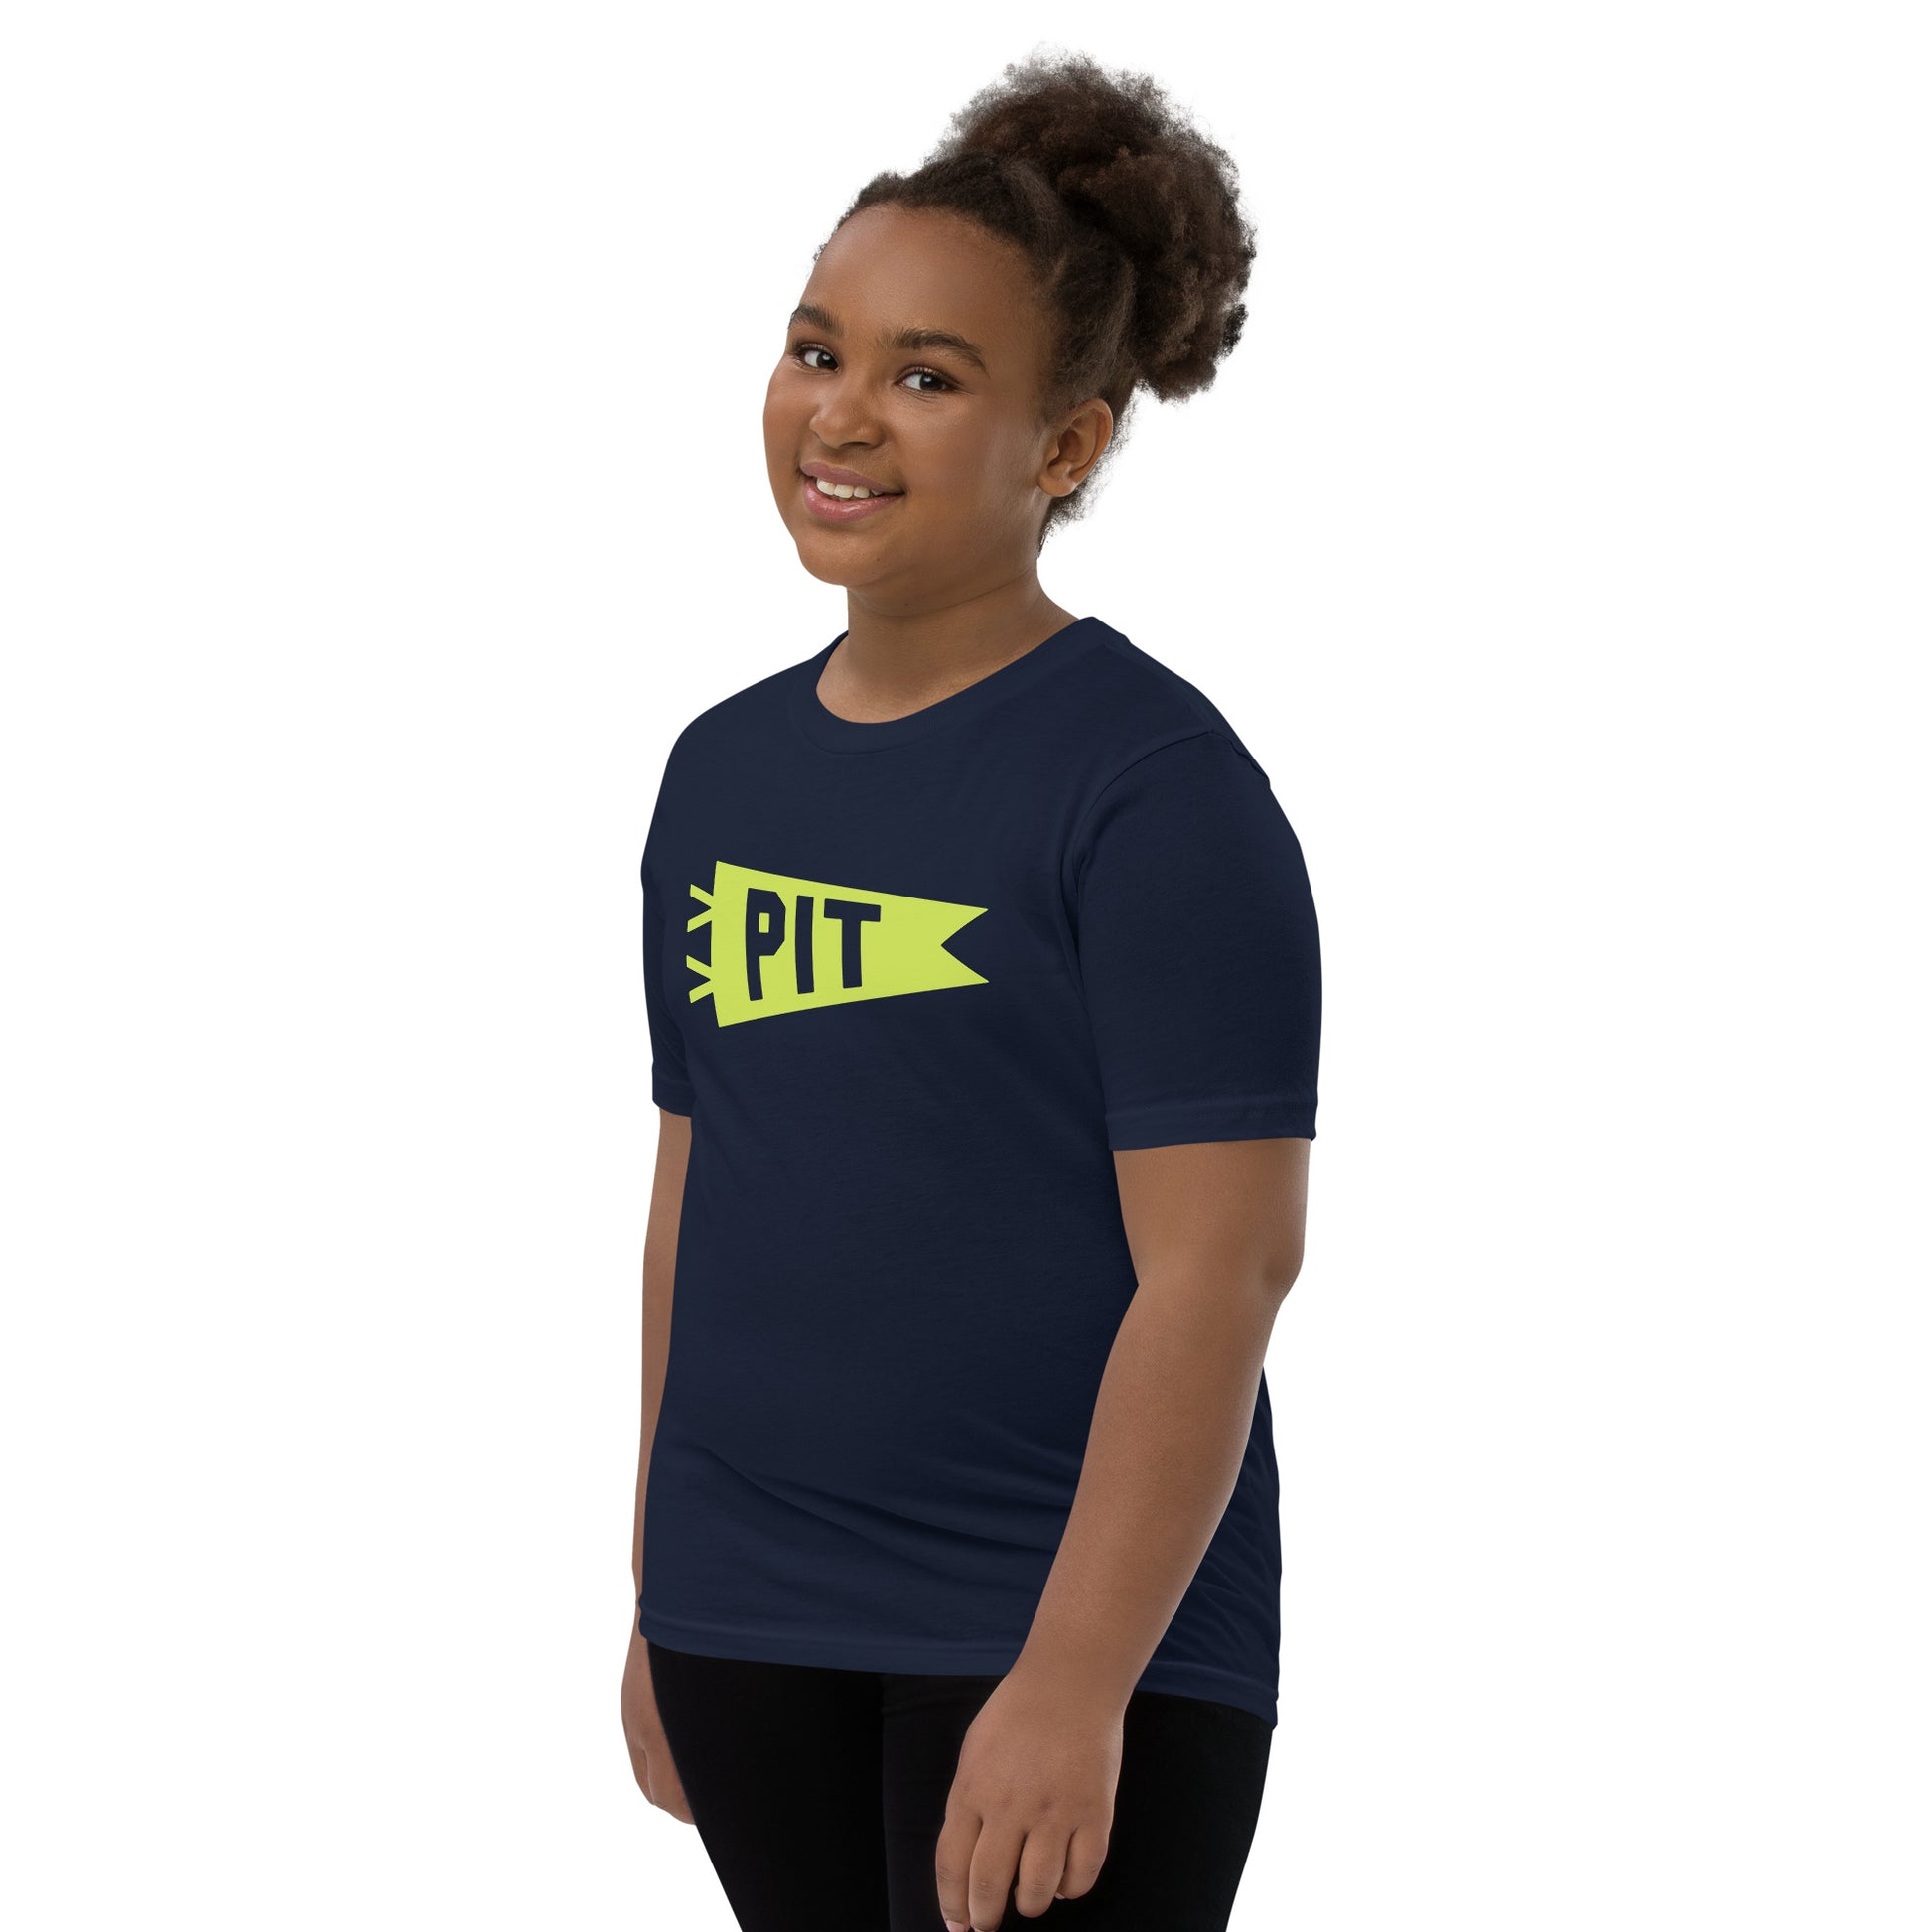 Kid's Airport Code Tee - Green Graphic • PIT Pittsburgh • YHM Designs - Image 04